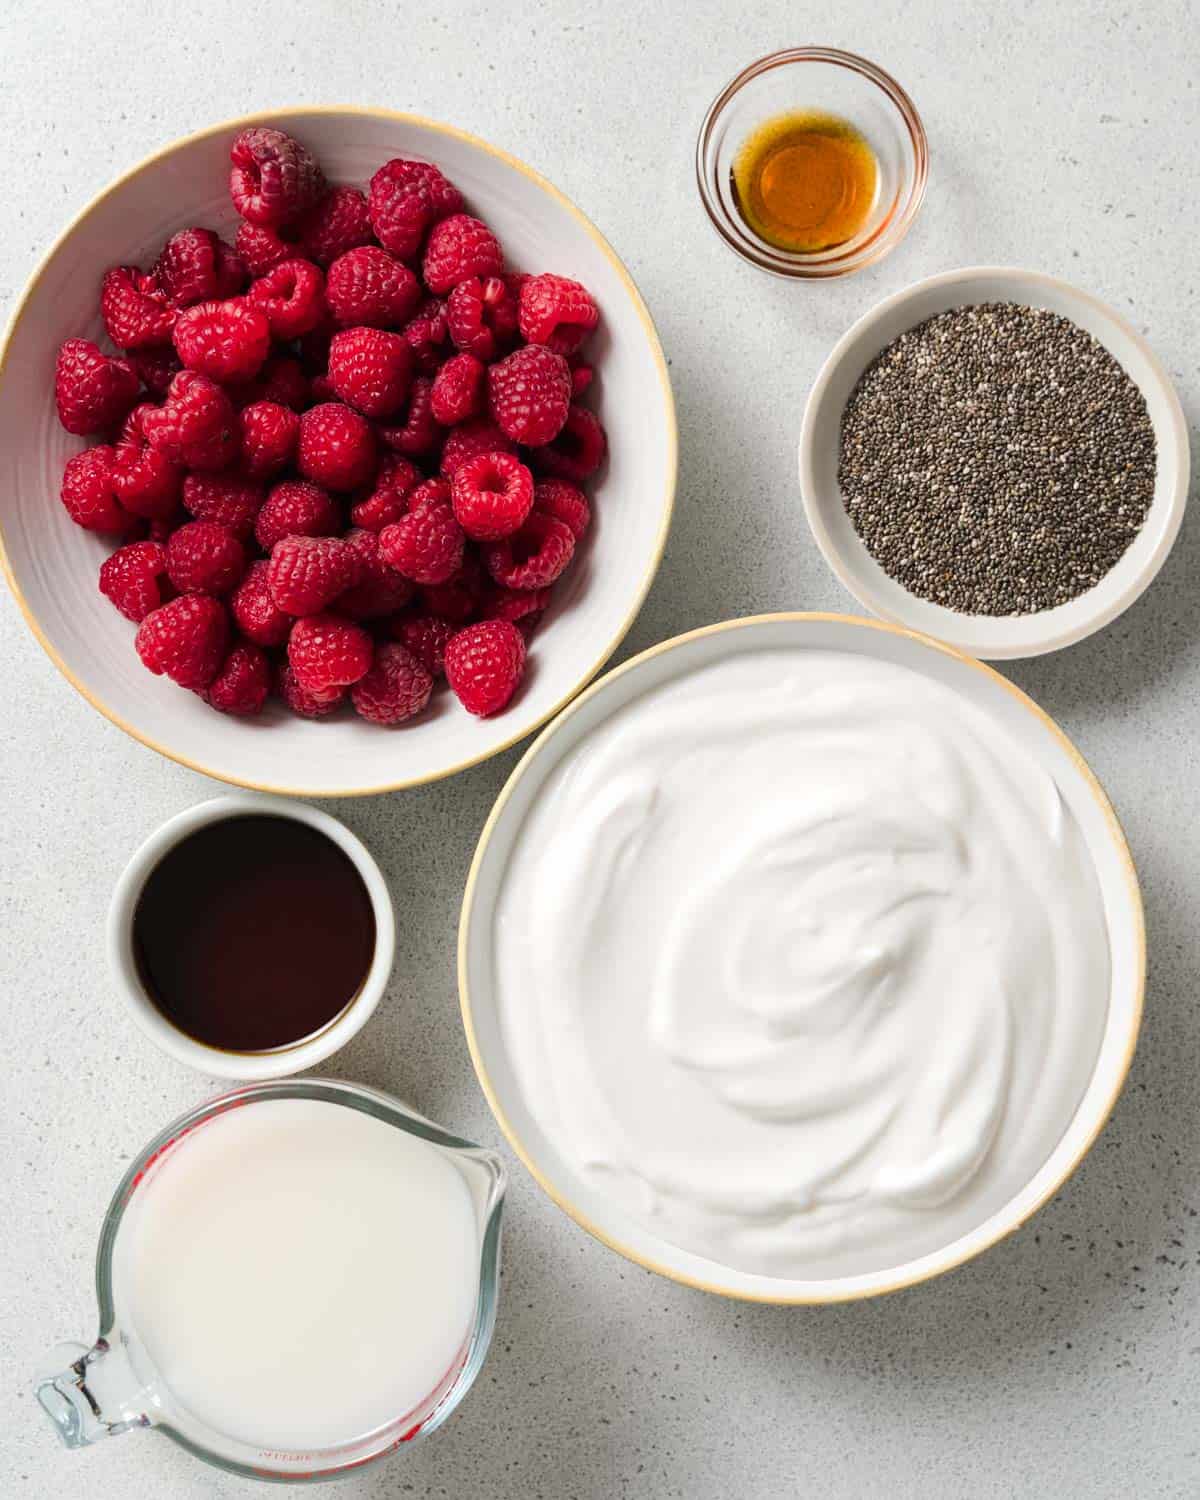 Raspberries, yogurt, chia seeds, milk, and maple syrup in small bowls.